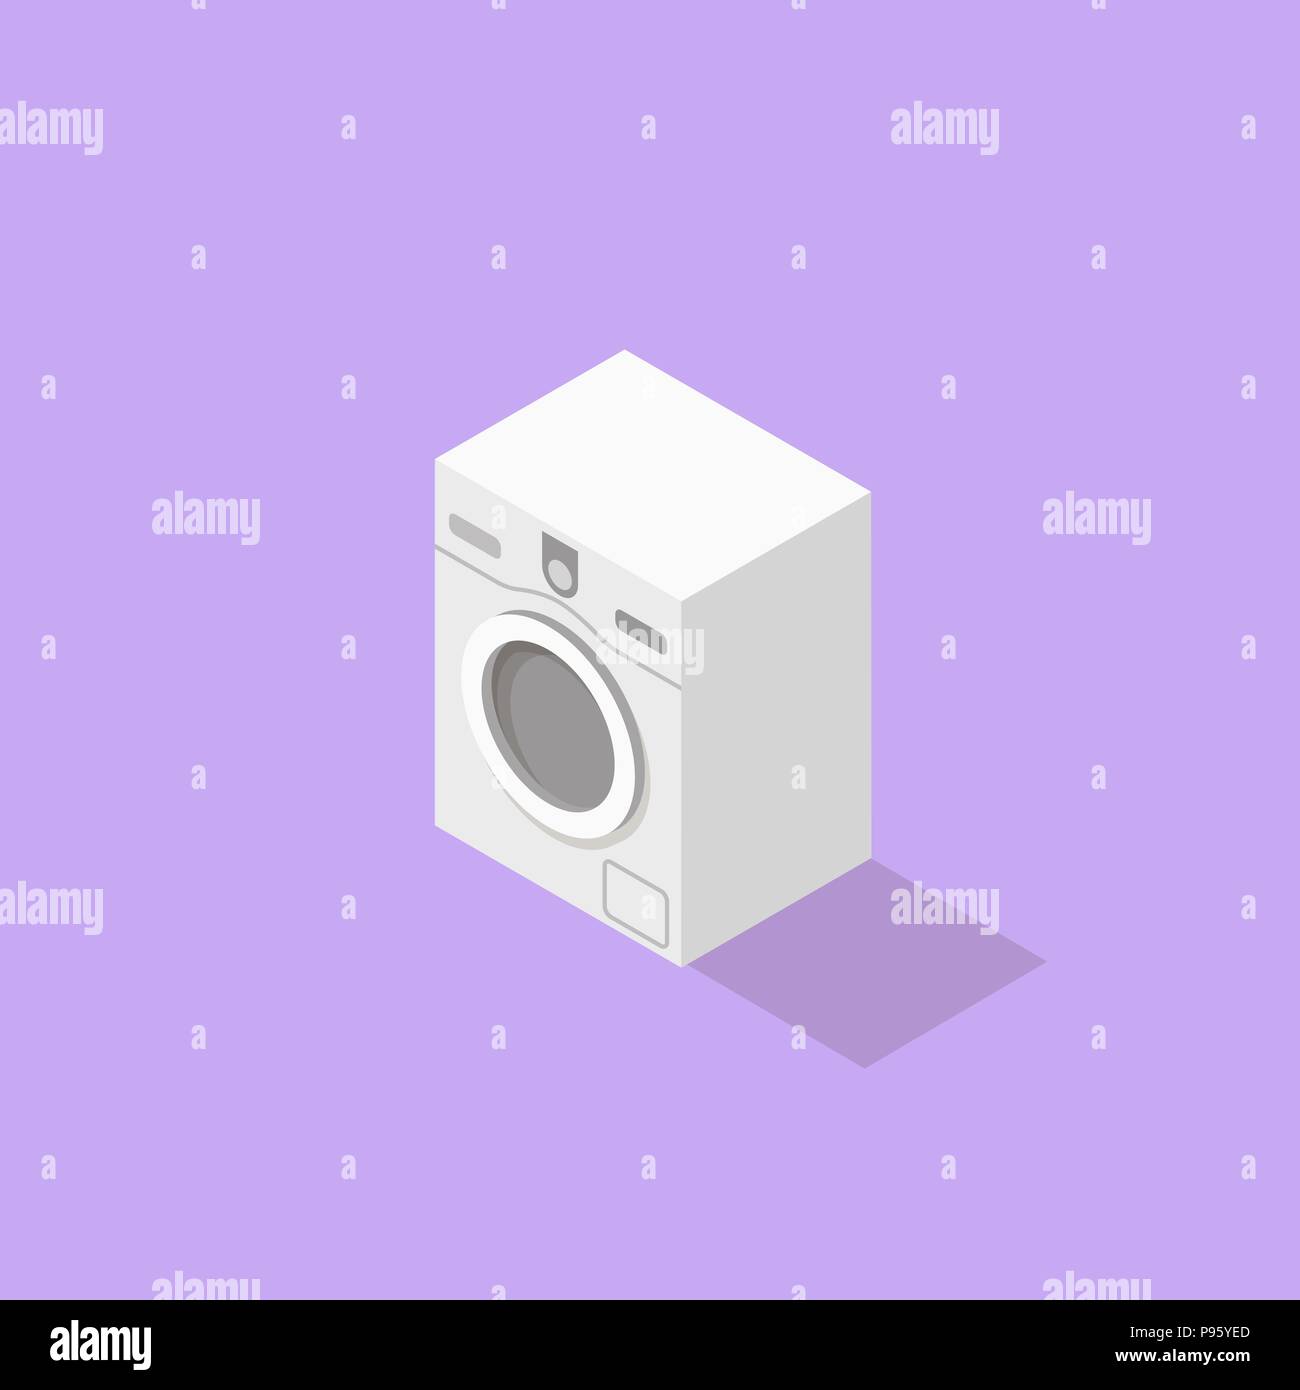 Low poly isometric washer Stock Vector